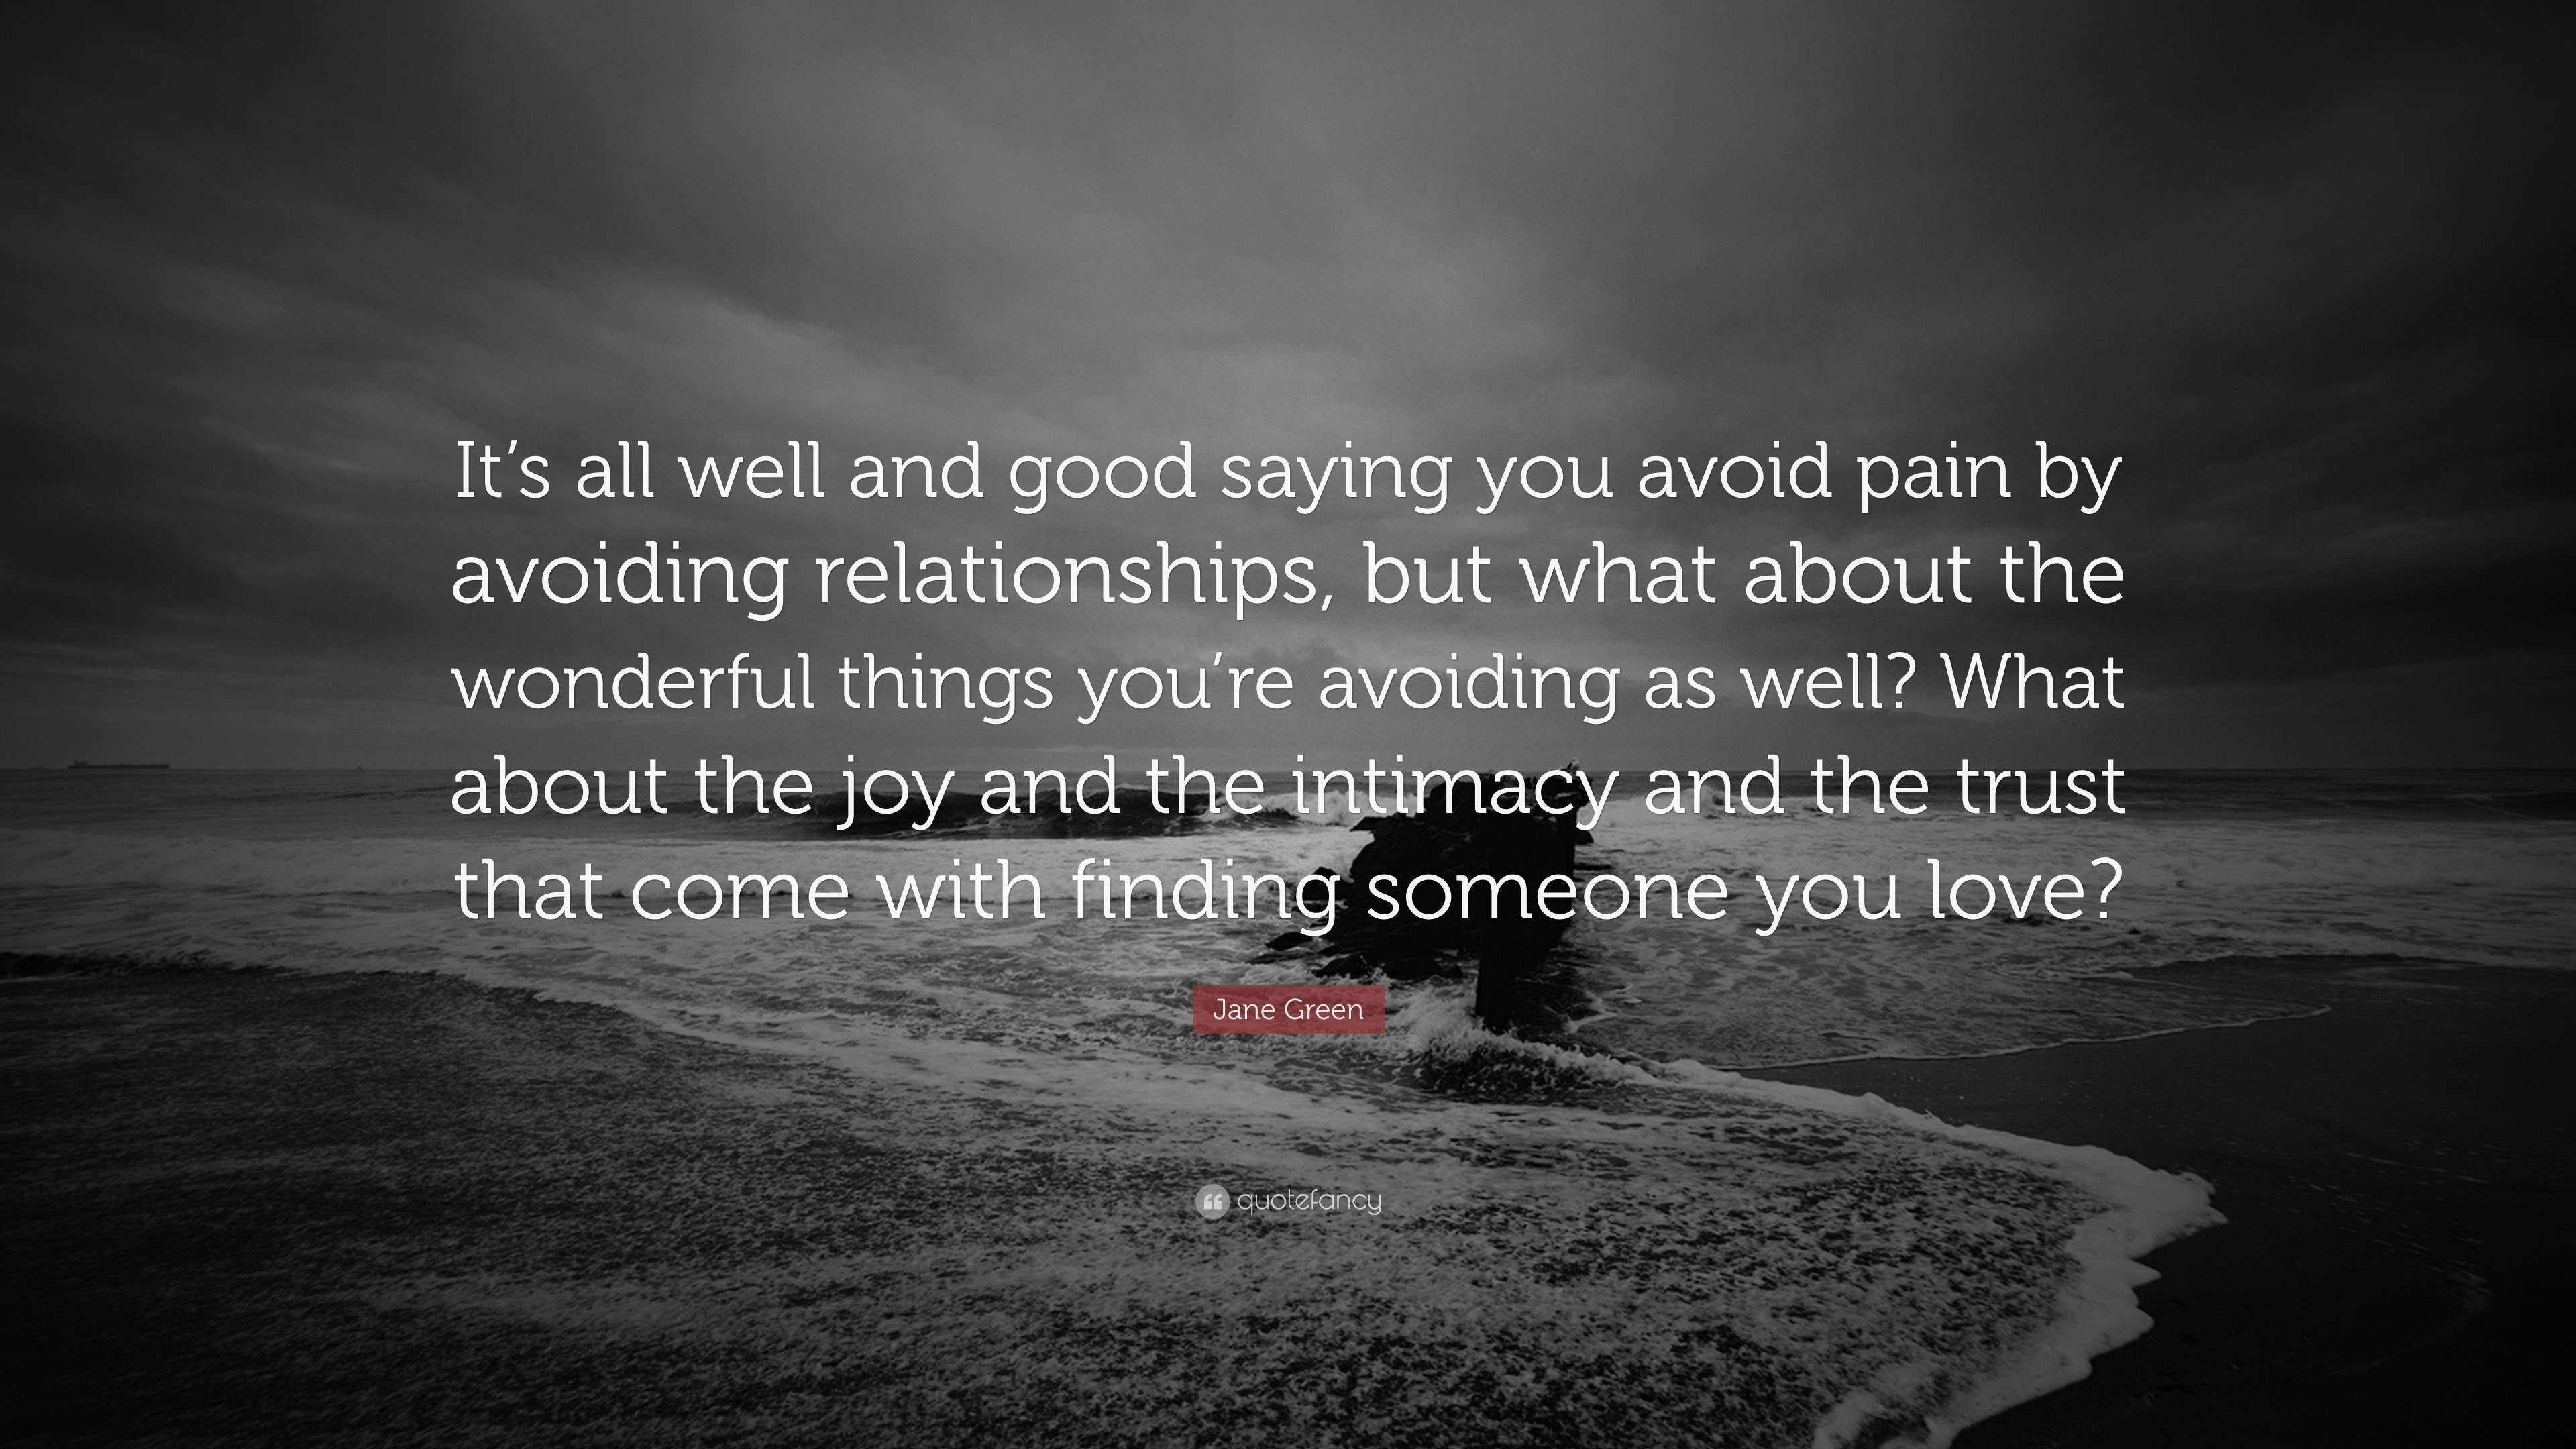 Jane Green Quote “It s all well and good saying you avoid pain by avoiding